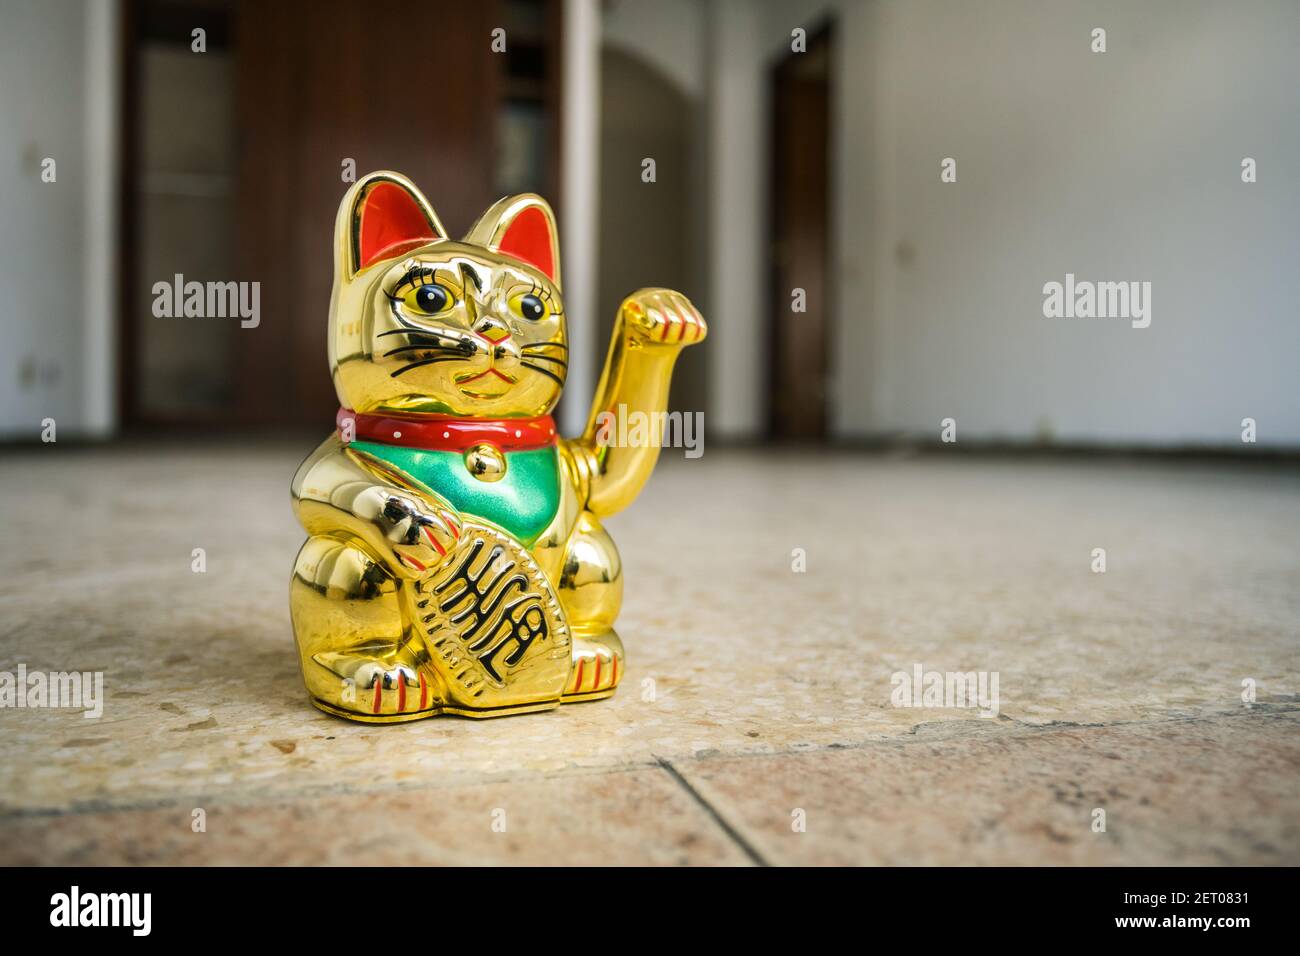 Japanese cat symbolism prosperity in empty house home for sale. Real estate market recovery investing mortgage hope to buy Stock Photo